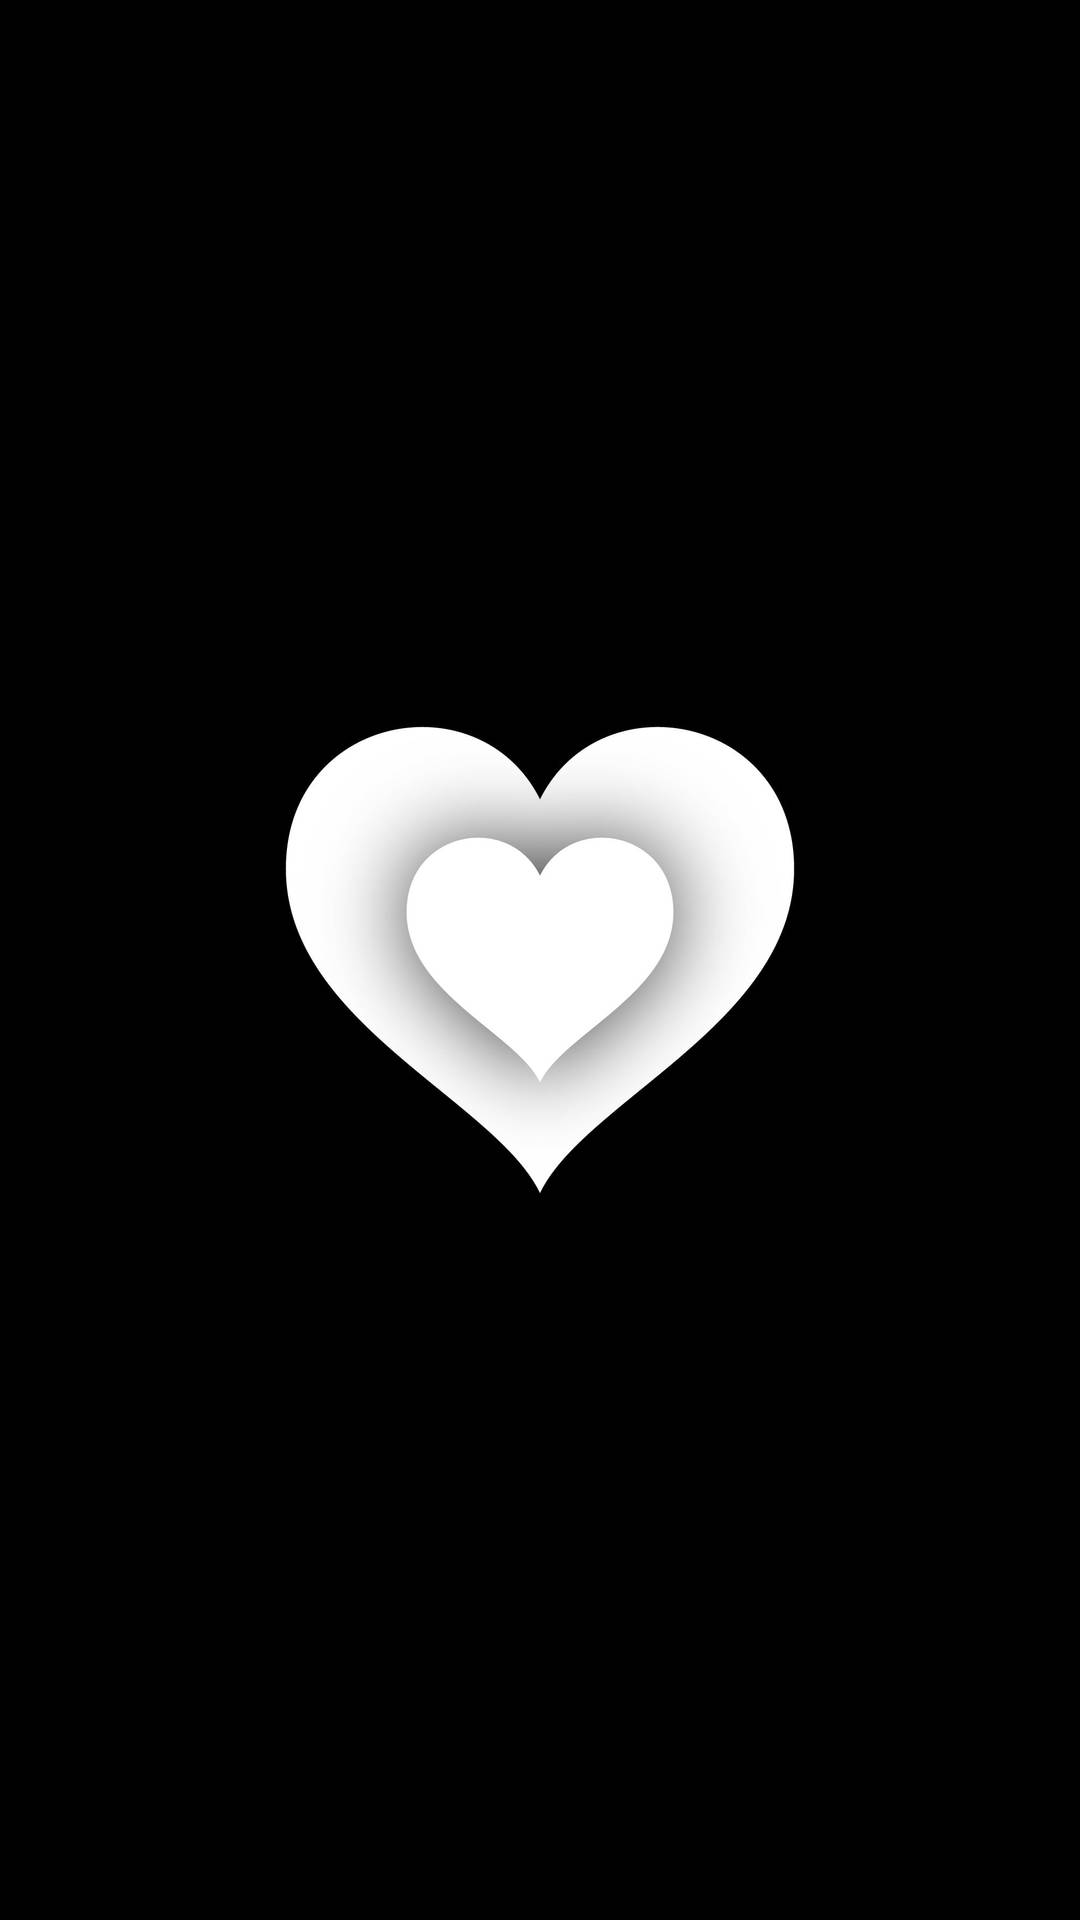 Layered Black And White Heart Background